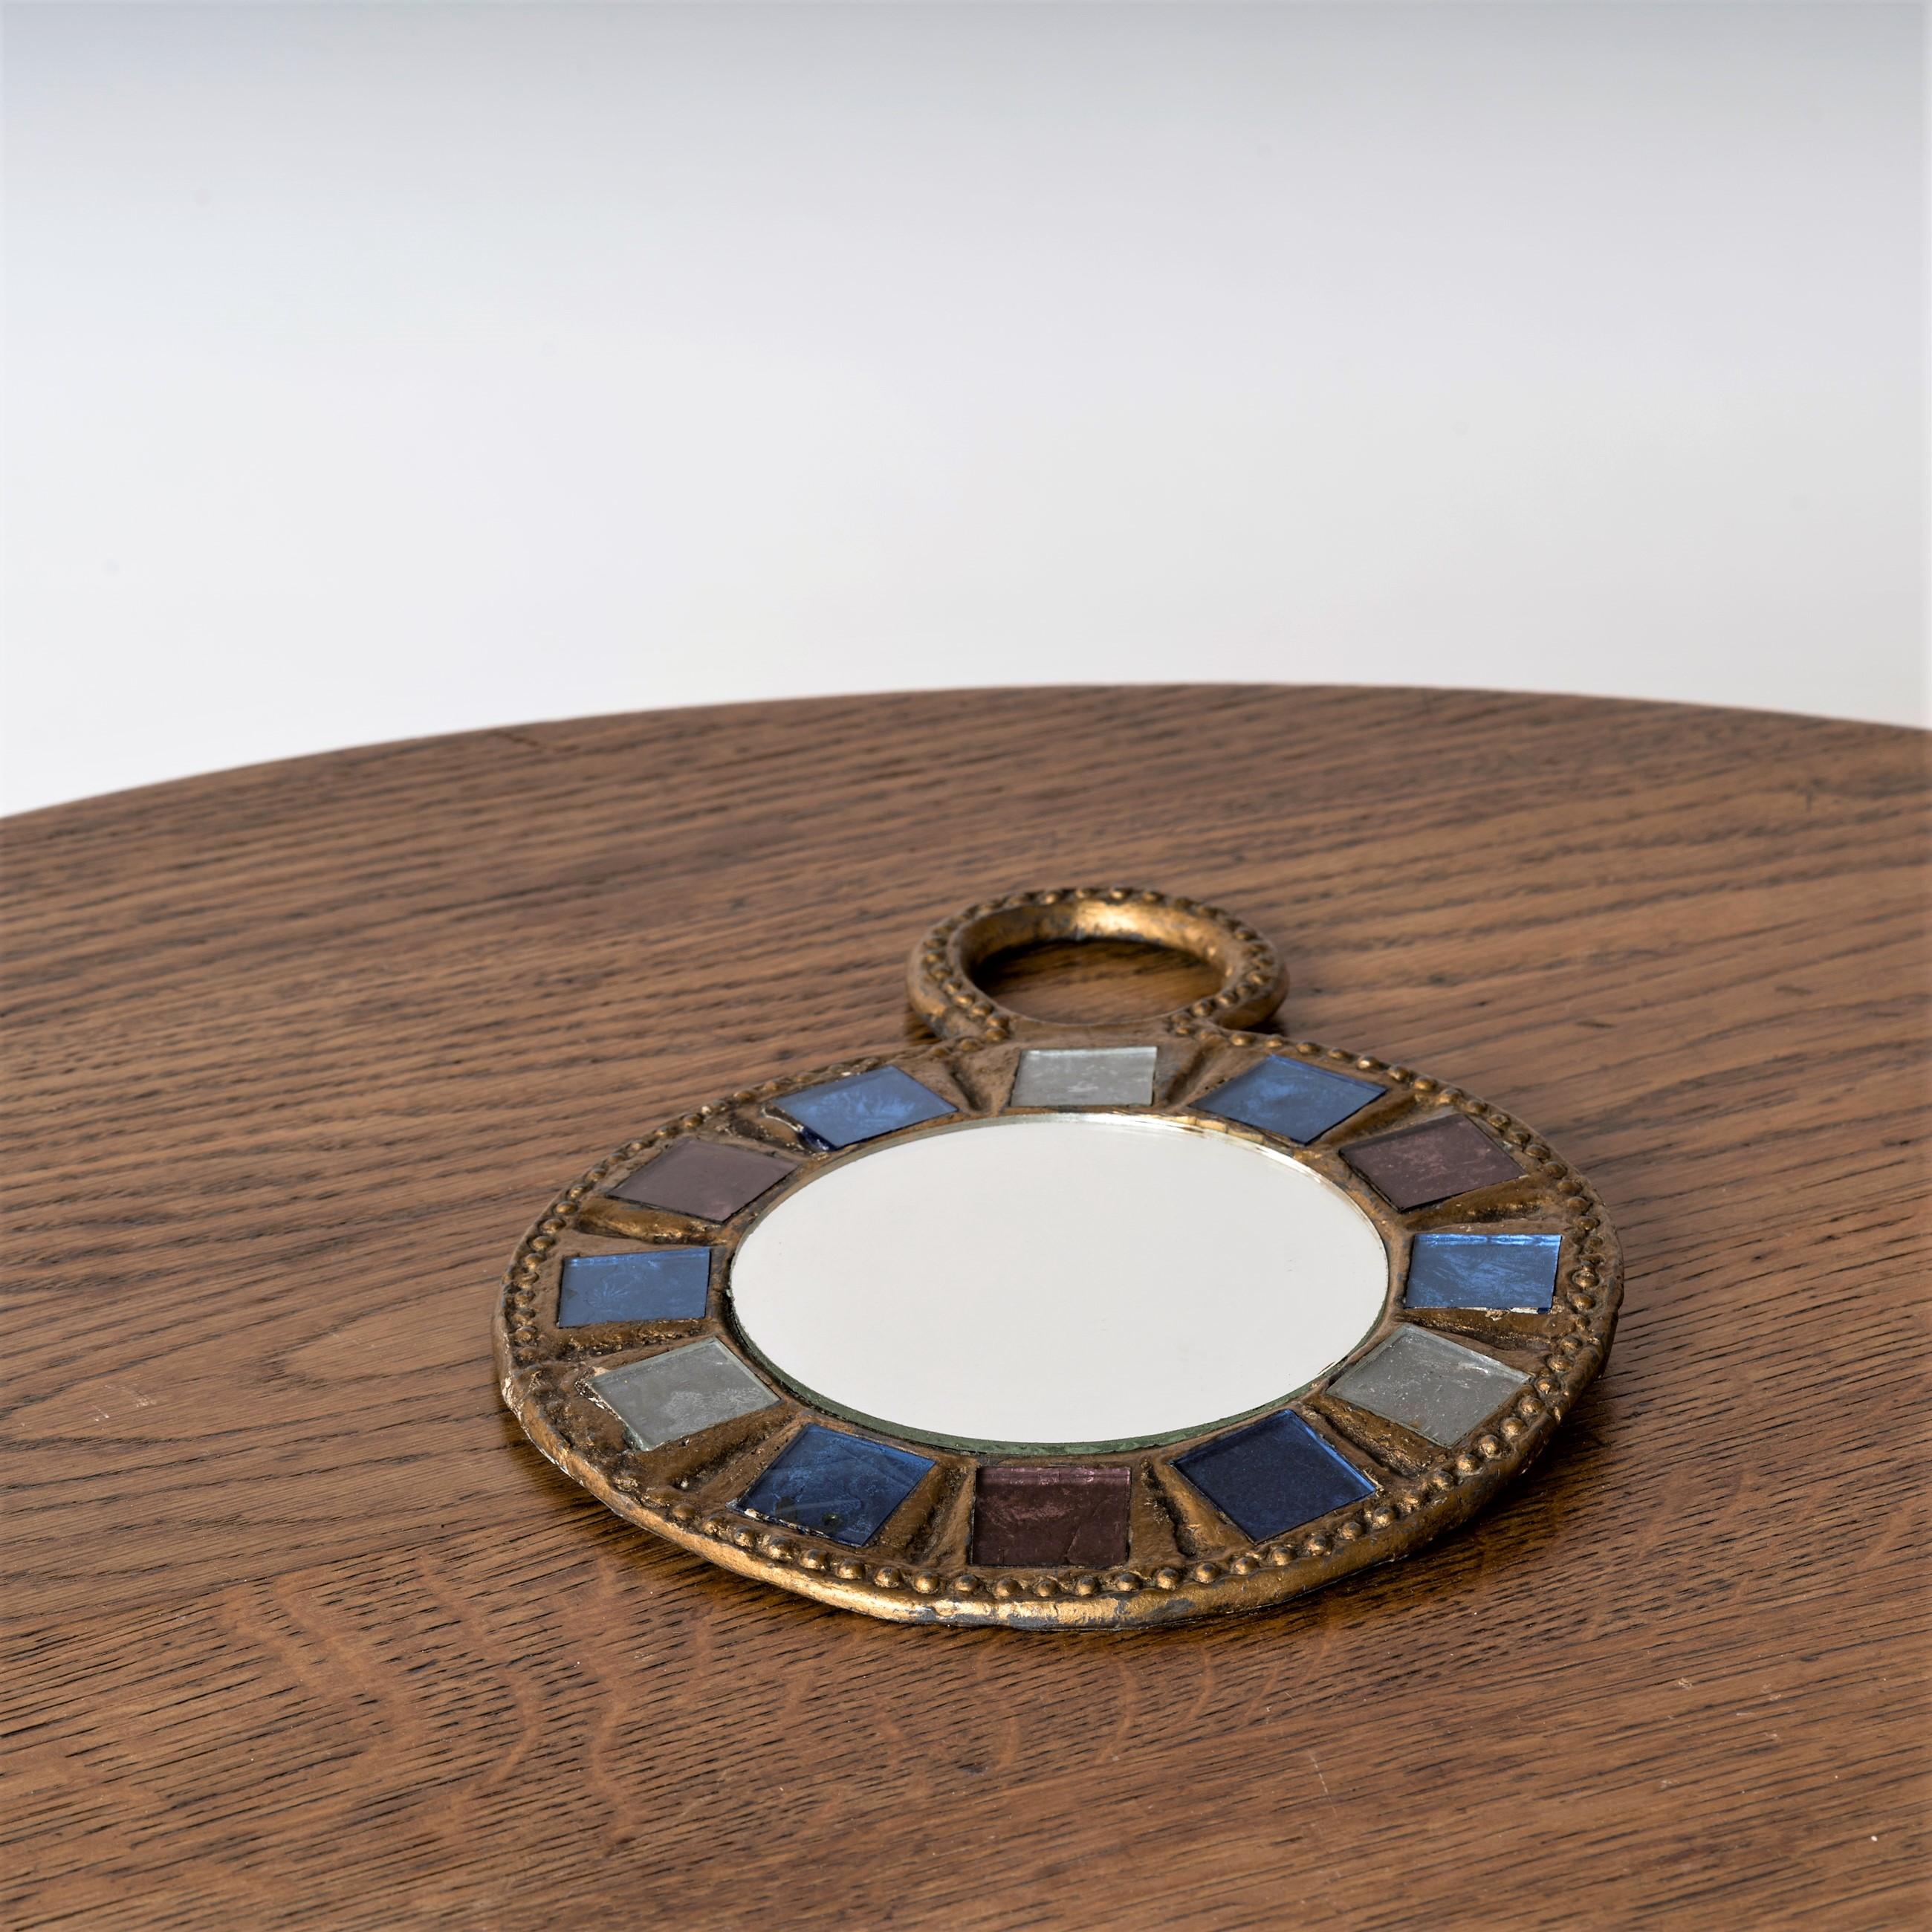 French Blue & Green Talosel Gilt Metal Mirror by Irena Jaworska - France 1970's For Sale